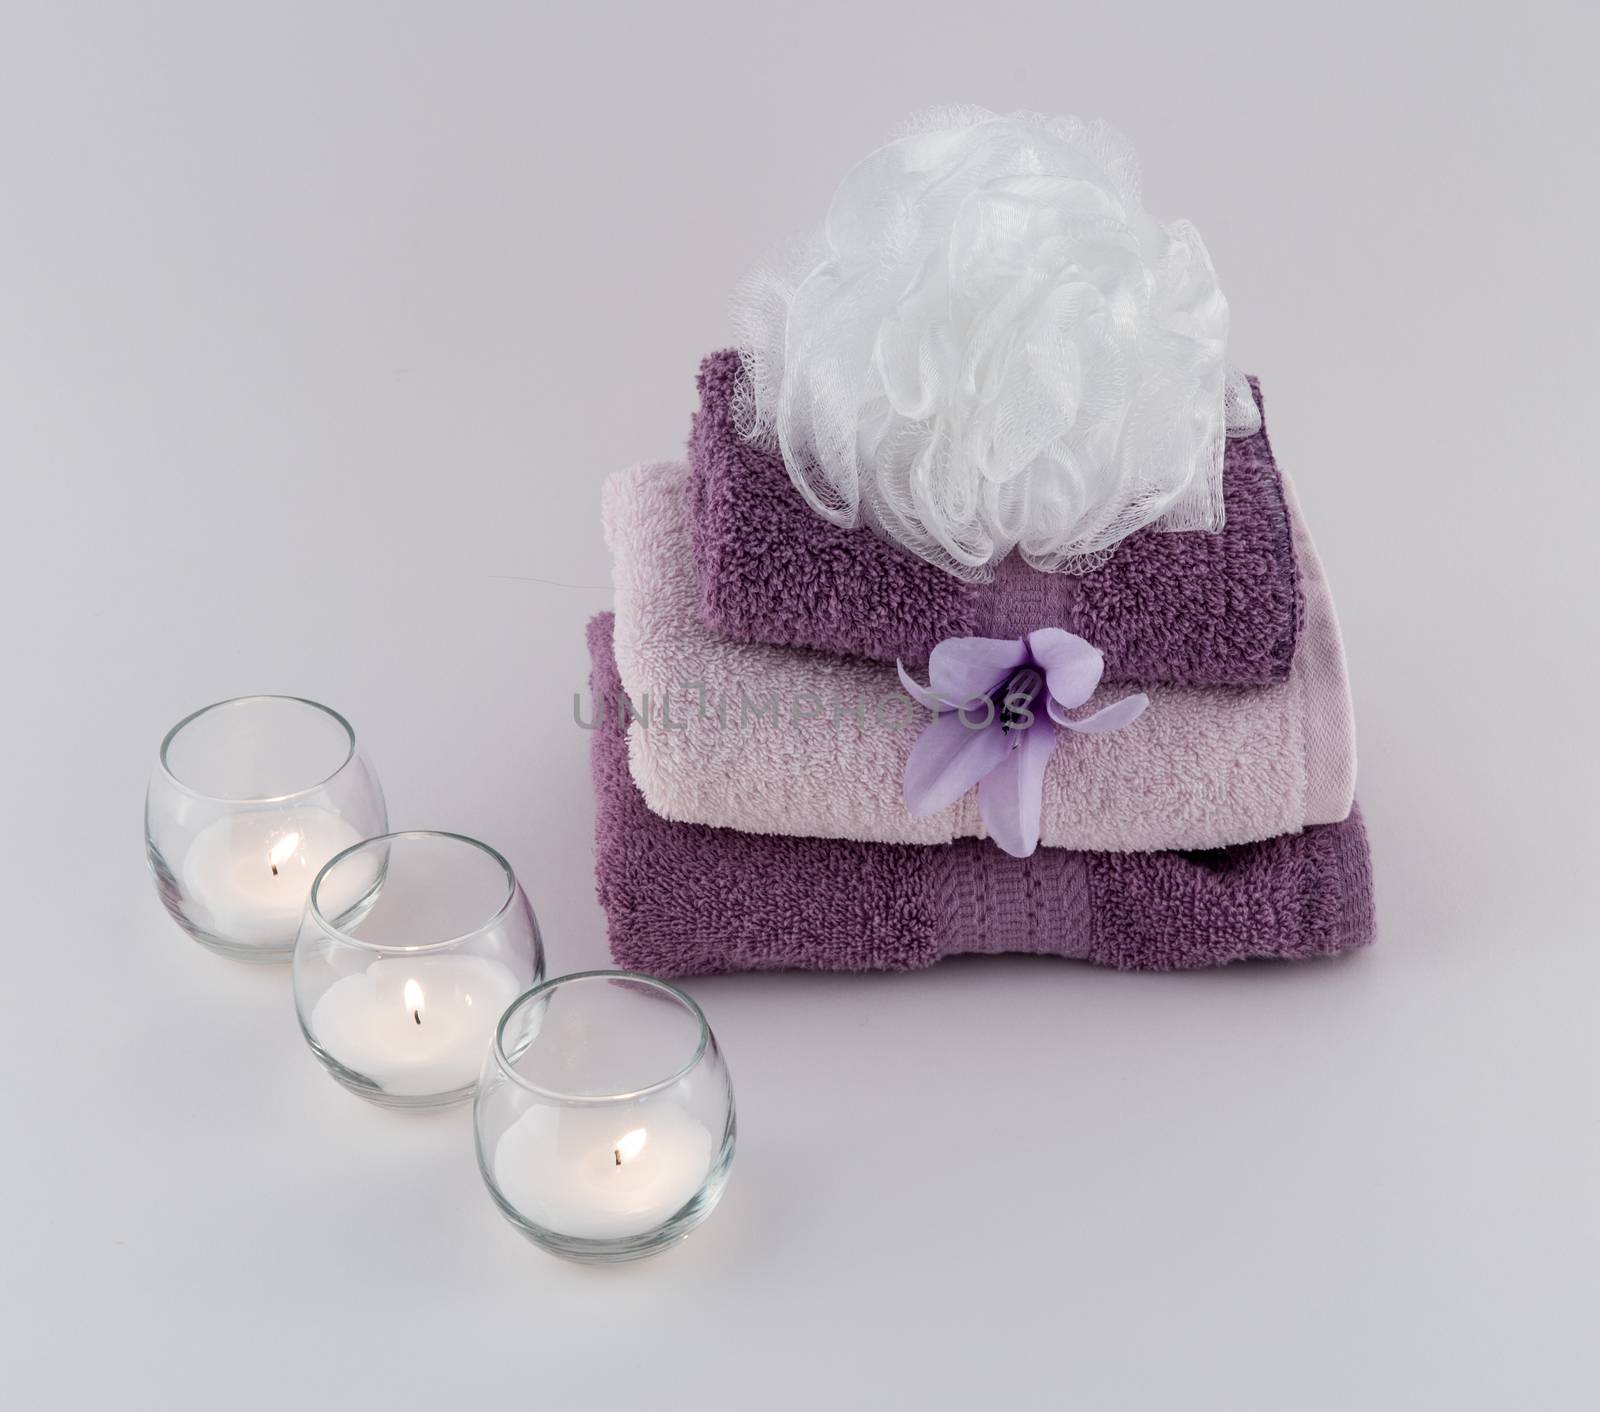 Towels and Bath Pouf With Candles by krisblackphotography